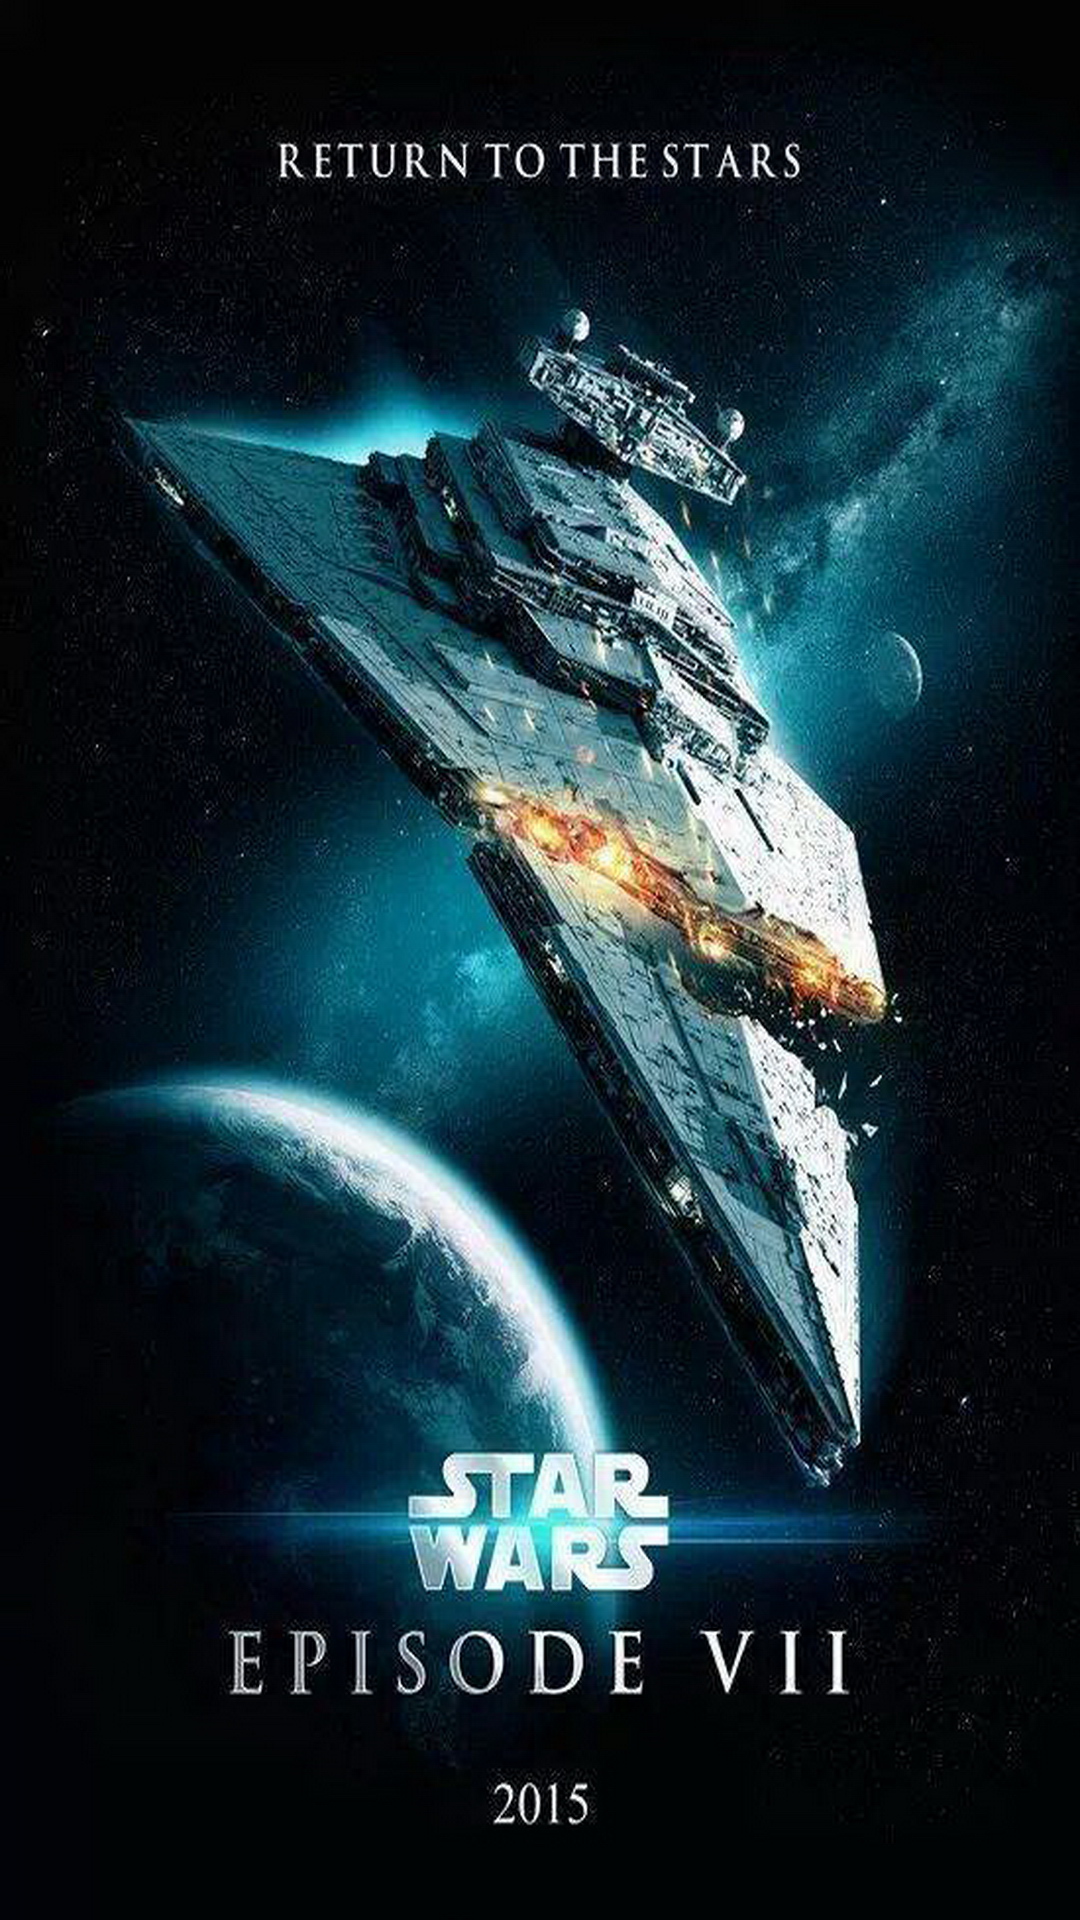 Free Download Star Wars Episode Vii Photos Of Epic Star Wars Iphone Wallpaper 1080x19 For Your Desktop Mobile Tablet Explore 49 Star Wars Iphone Wallpaper Hd Star Wars Phone